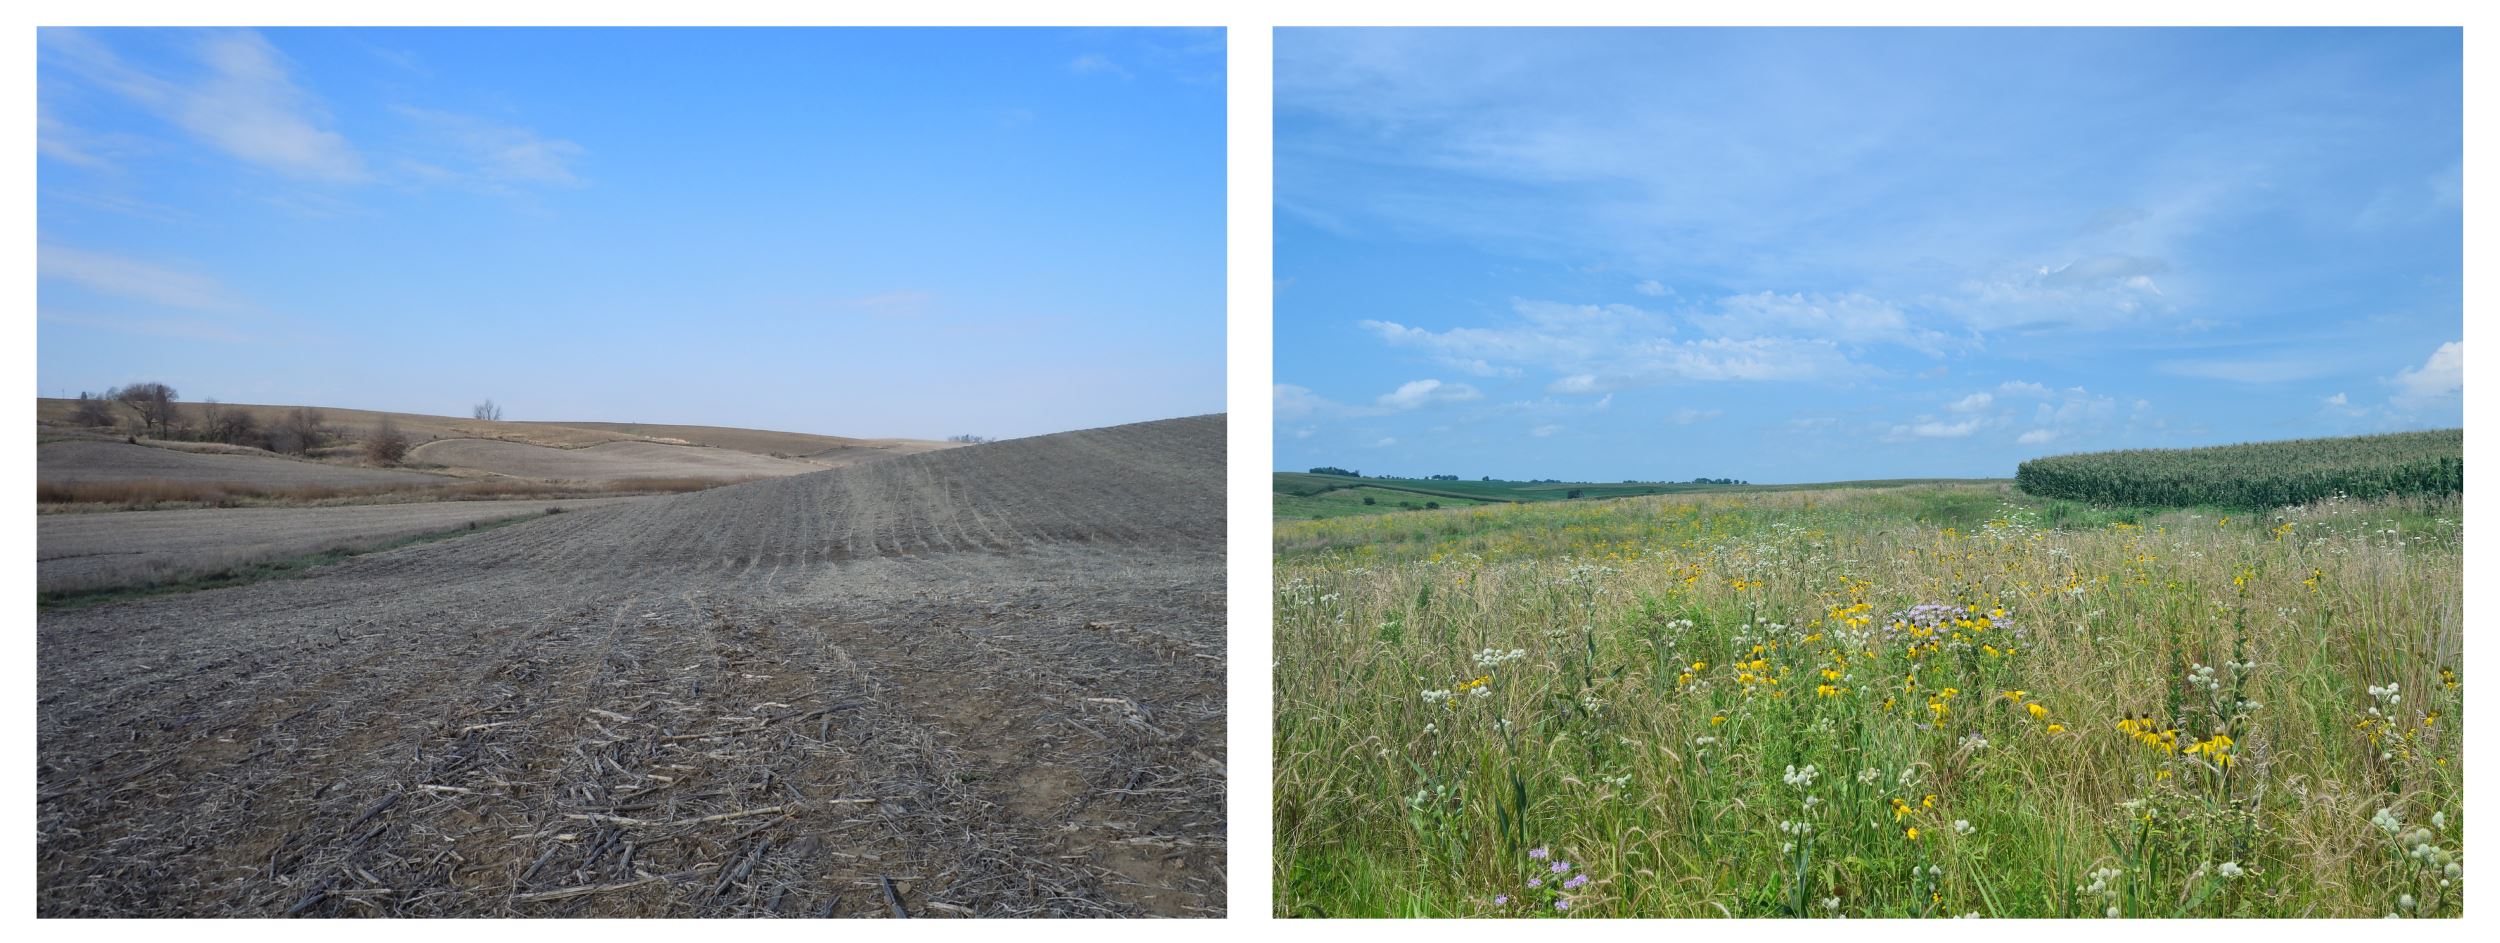 Two images showing cropland before and after prairie reconstruction